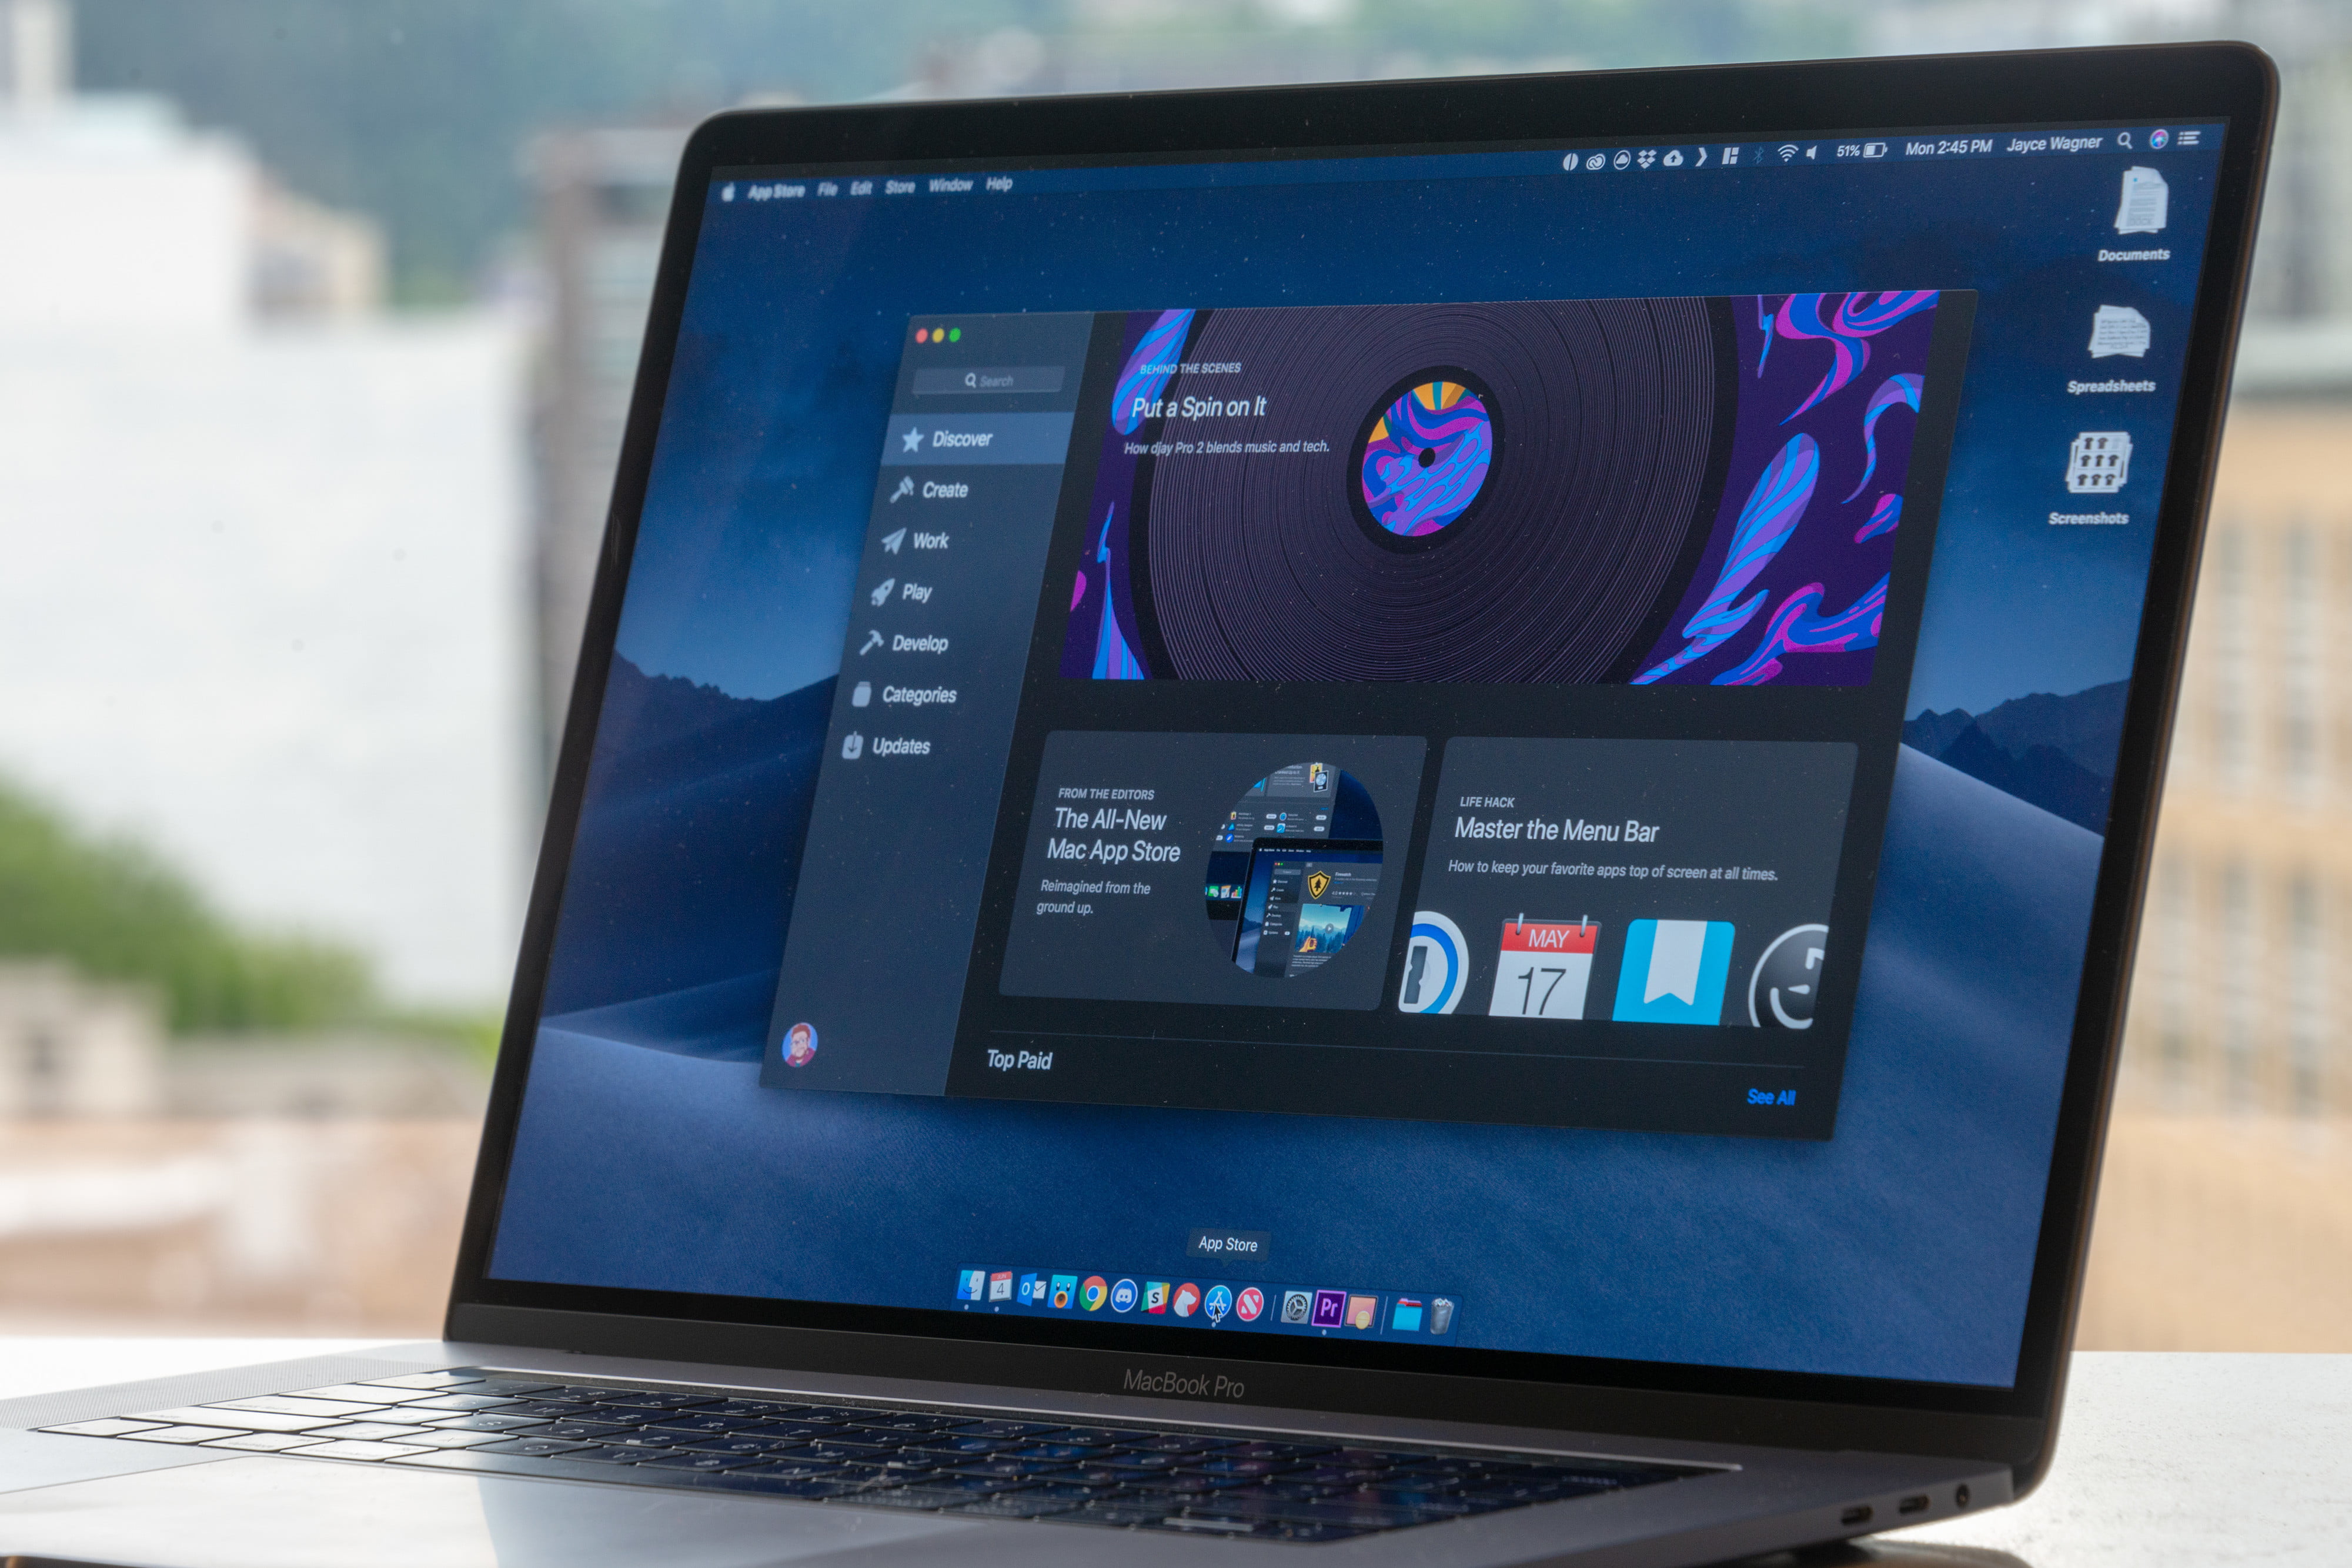 phoneview compatible with macos mojave